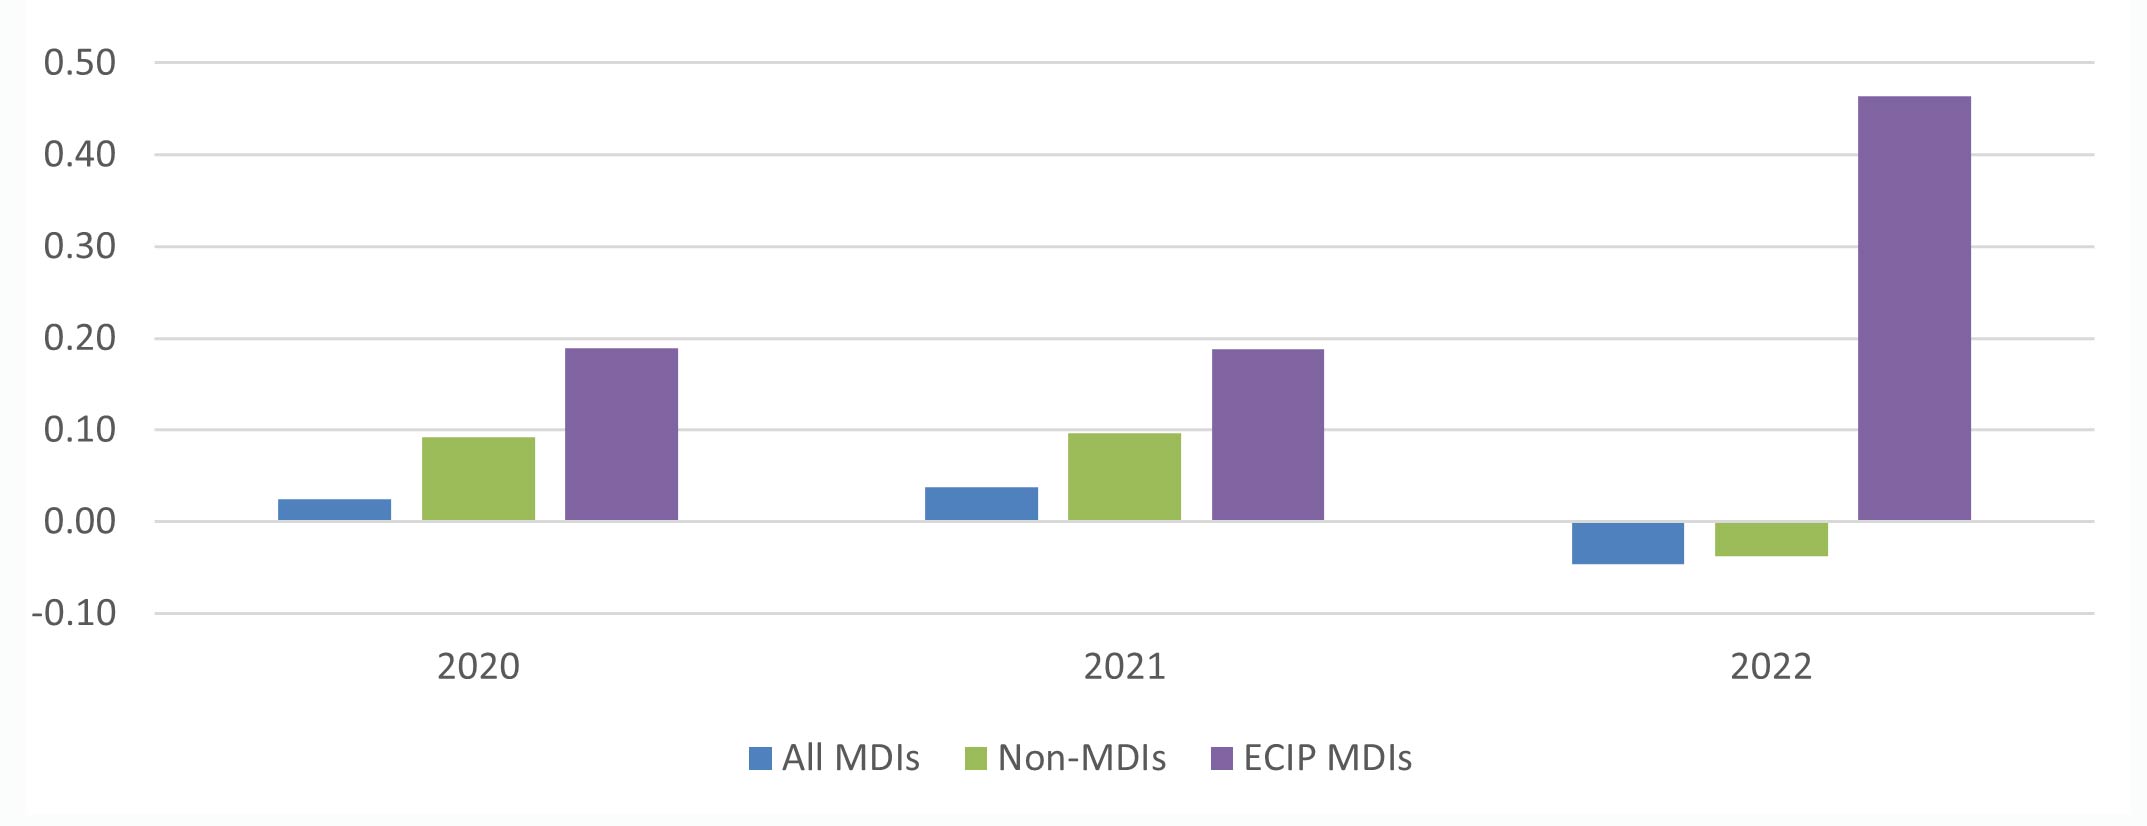 Figure 3 depicts year-over-year (December) percent change in equity average for 2020 through 2022 comparing all MDIs, Non-MDIs and MDIs that received ECIP.